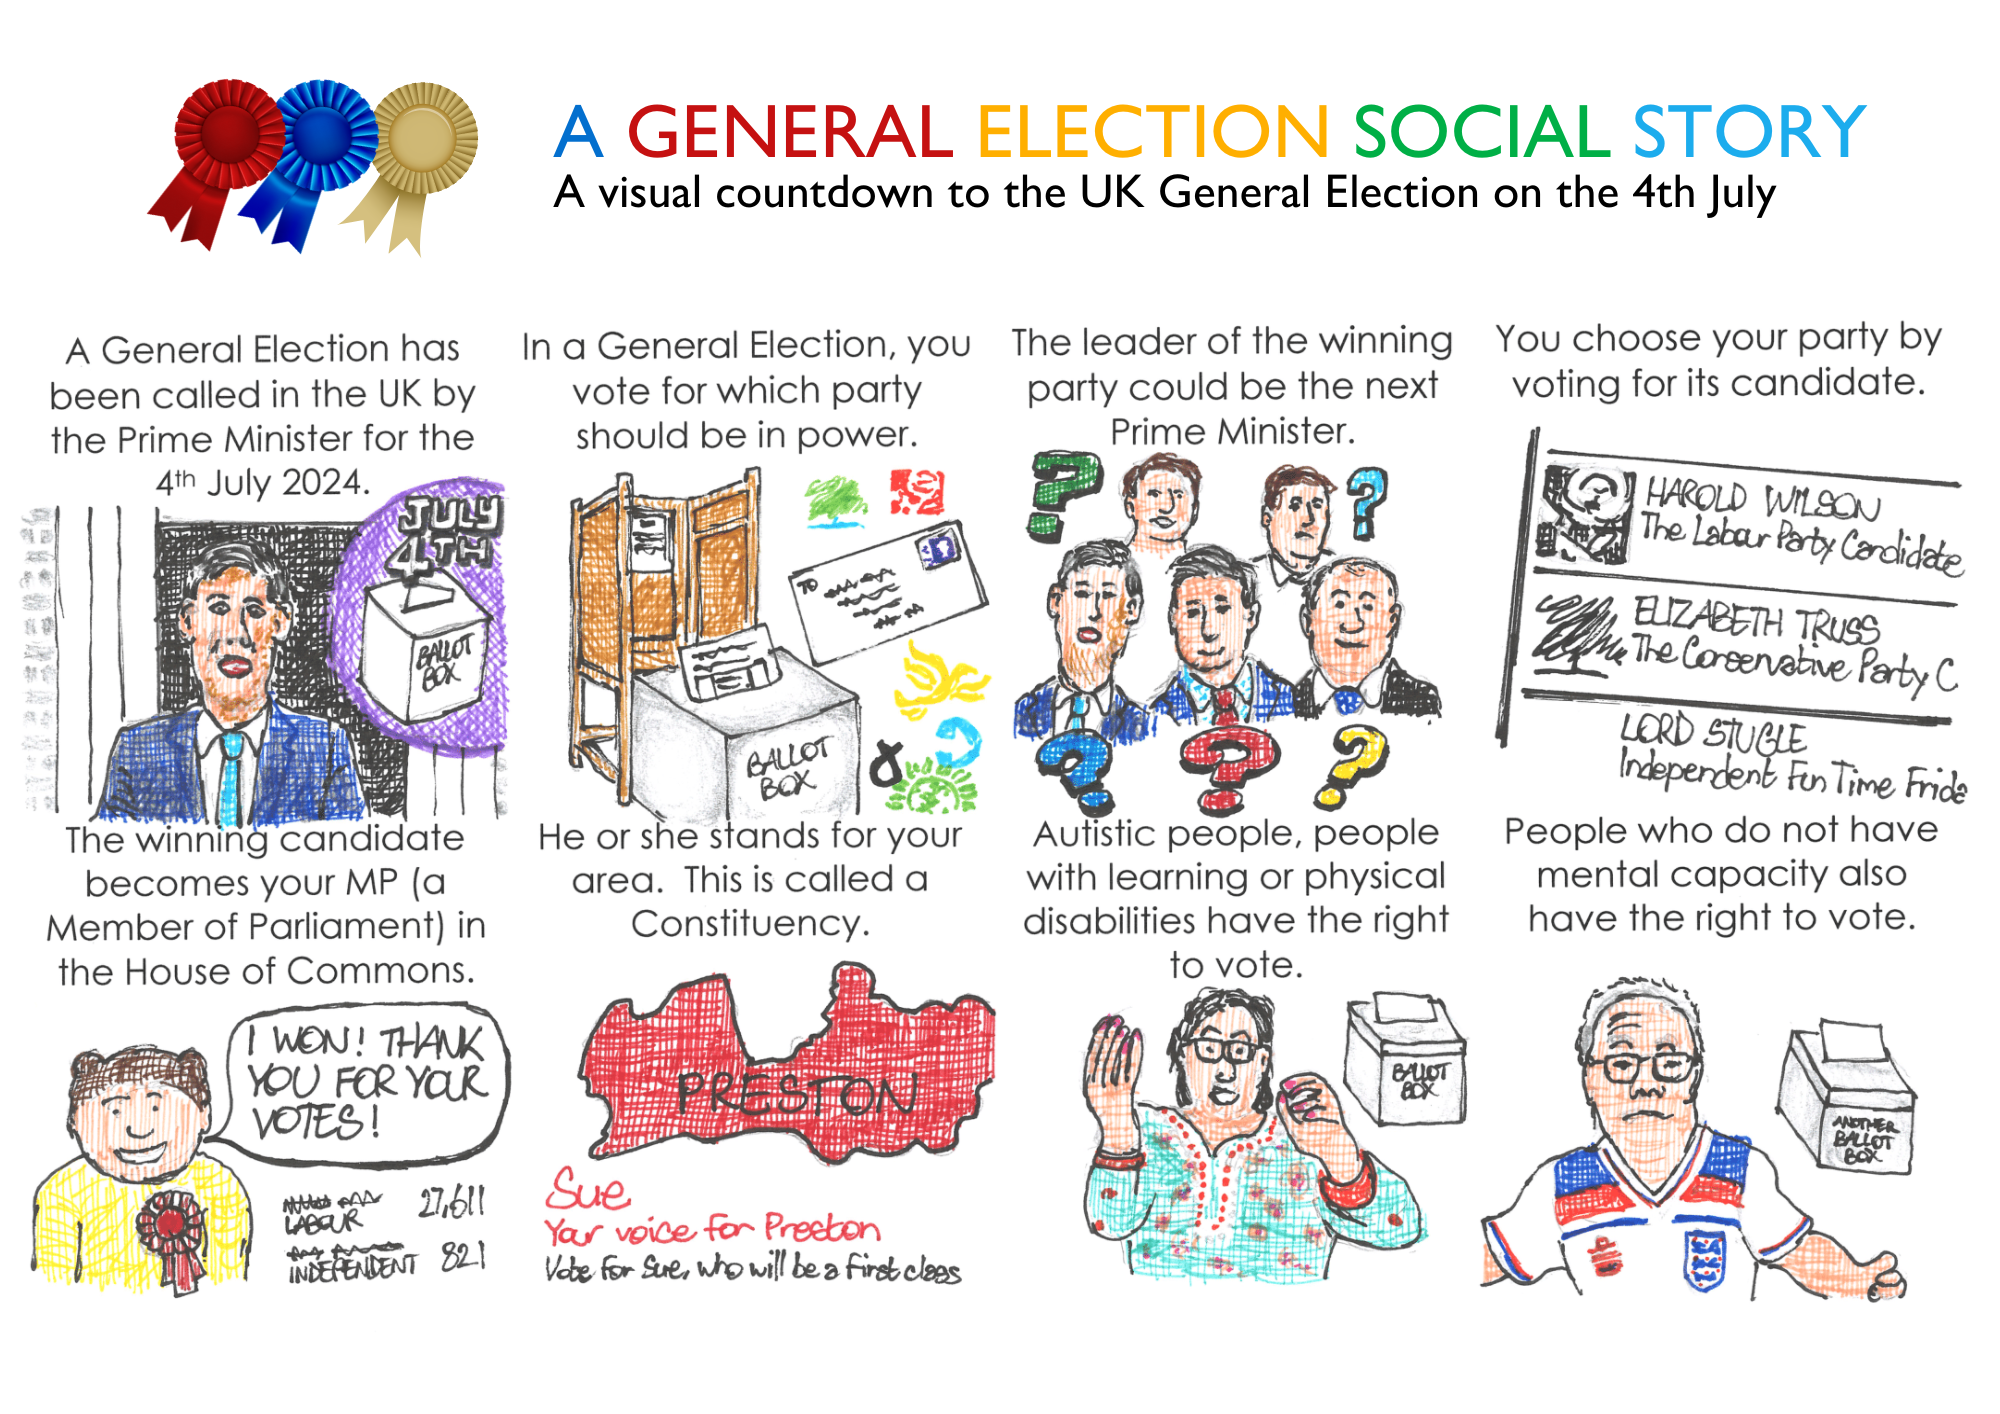 A General Election Social Story (Page 1 of 2)